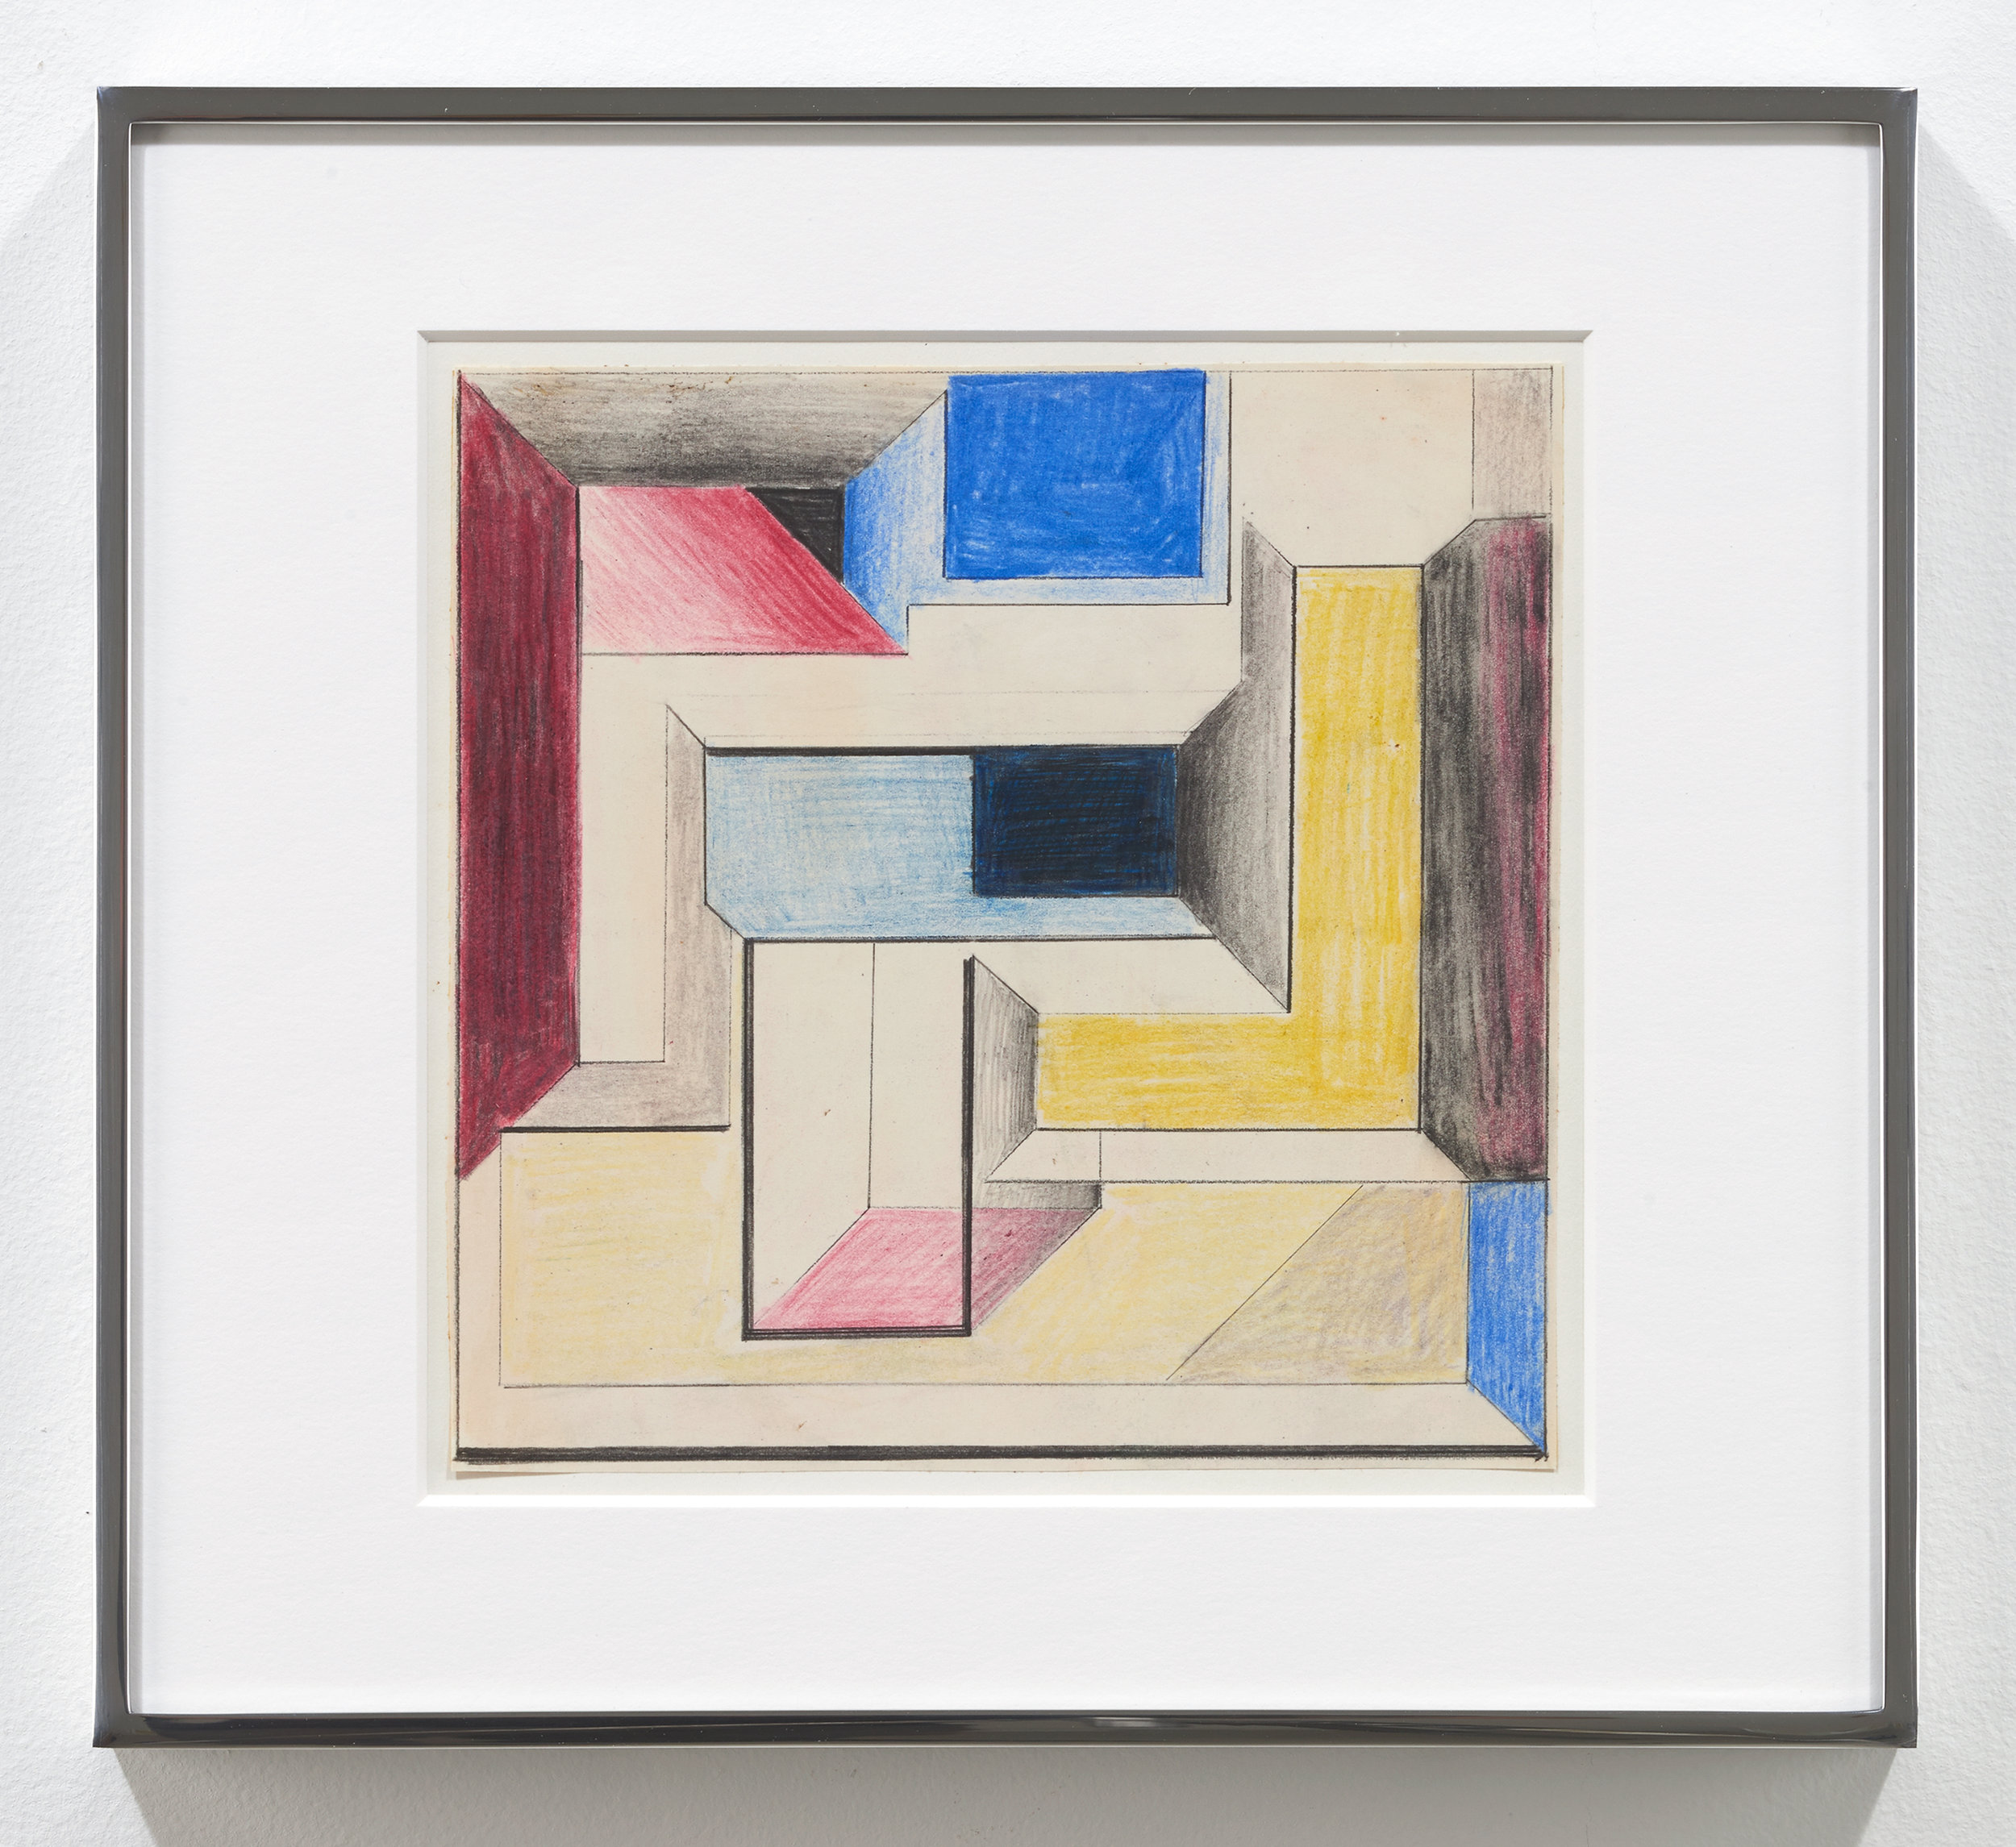  Suzanne Blank Redstone,  Drawing for Construction #4 , 1968, Paper, tracing paper, pencil and color pencil, Framed dimensions: 10.25 x 11.25 inches 